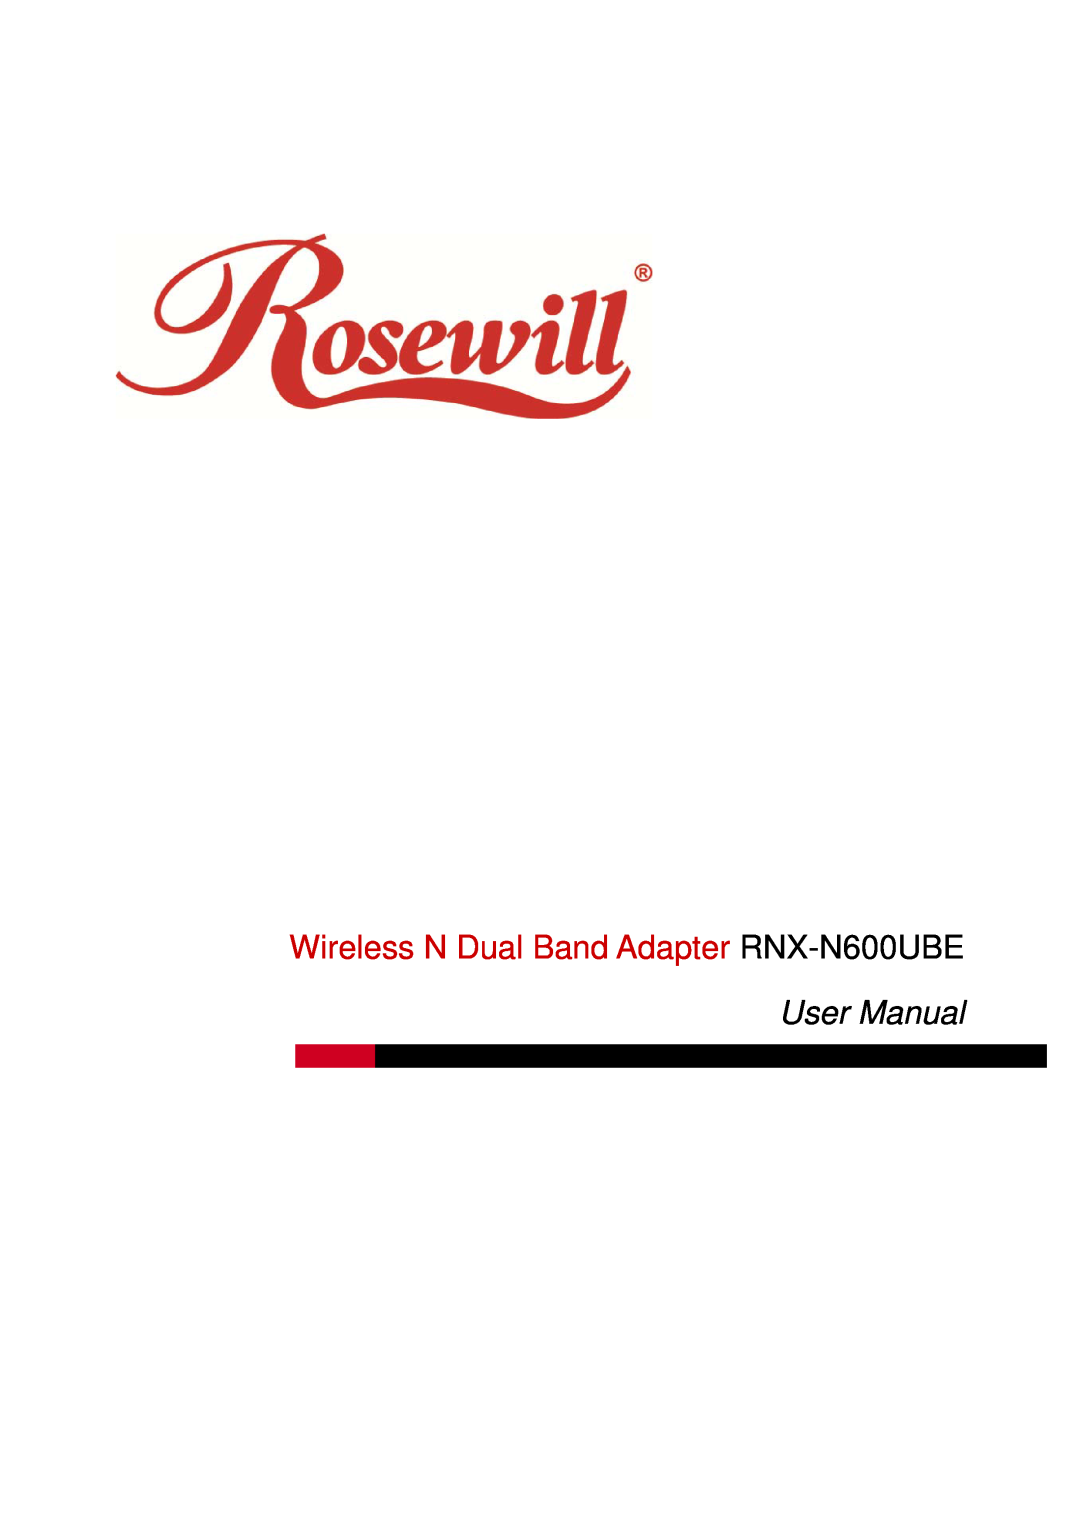 Rosewill RNX-N600UBE user manual Introduction, Package Content, Overview of the Product, Features 